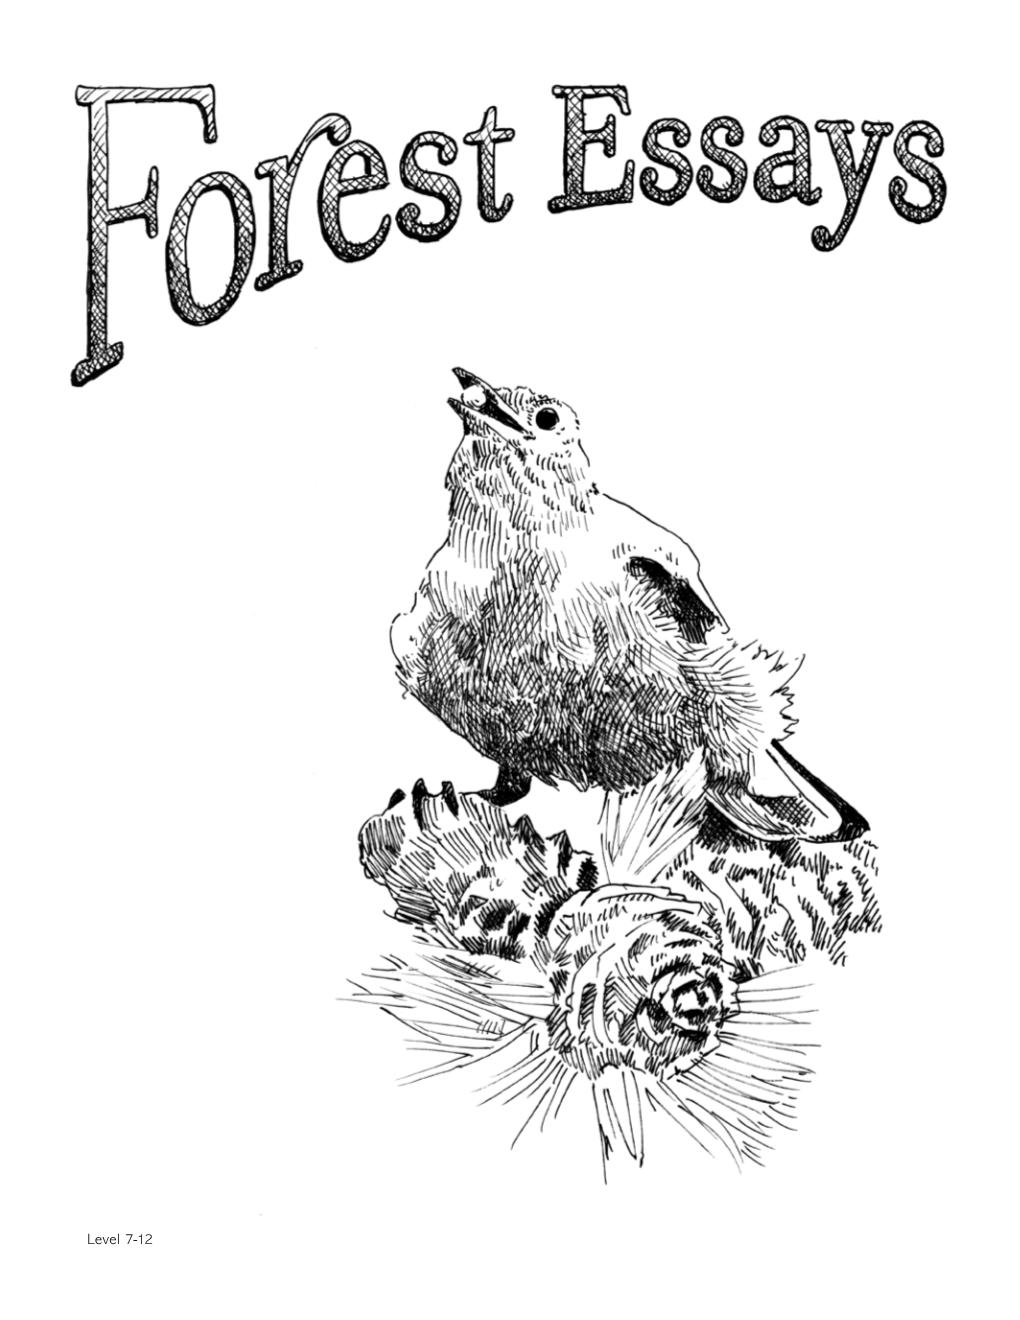 Forest Essays (Level 7-12)